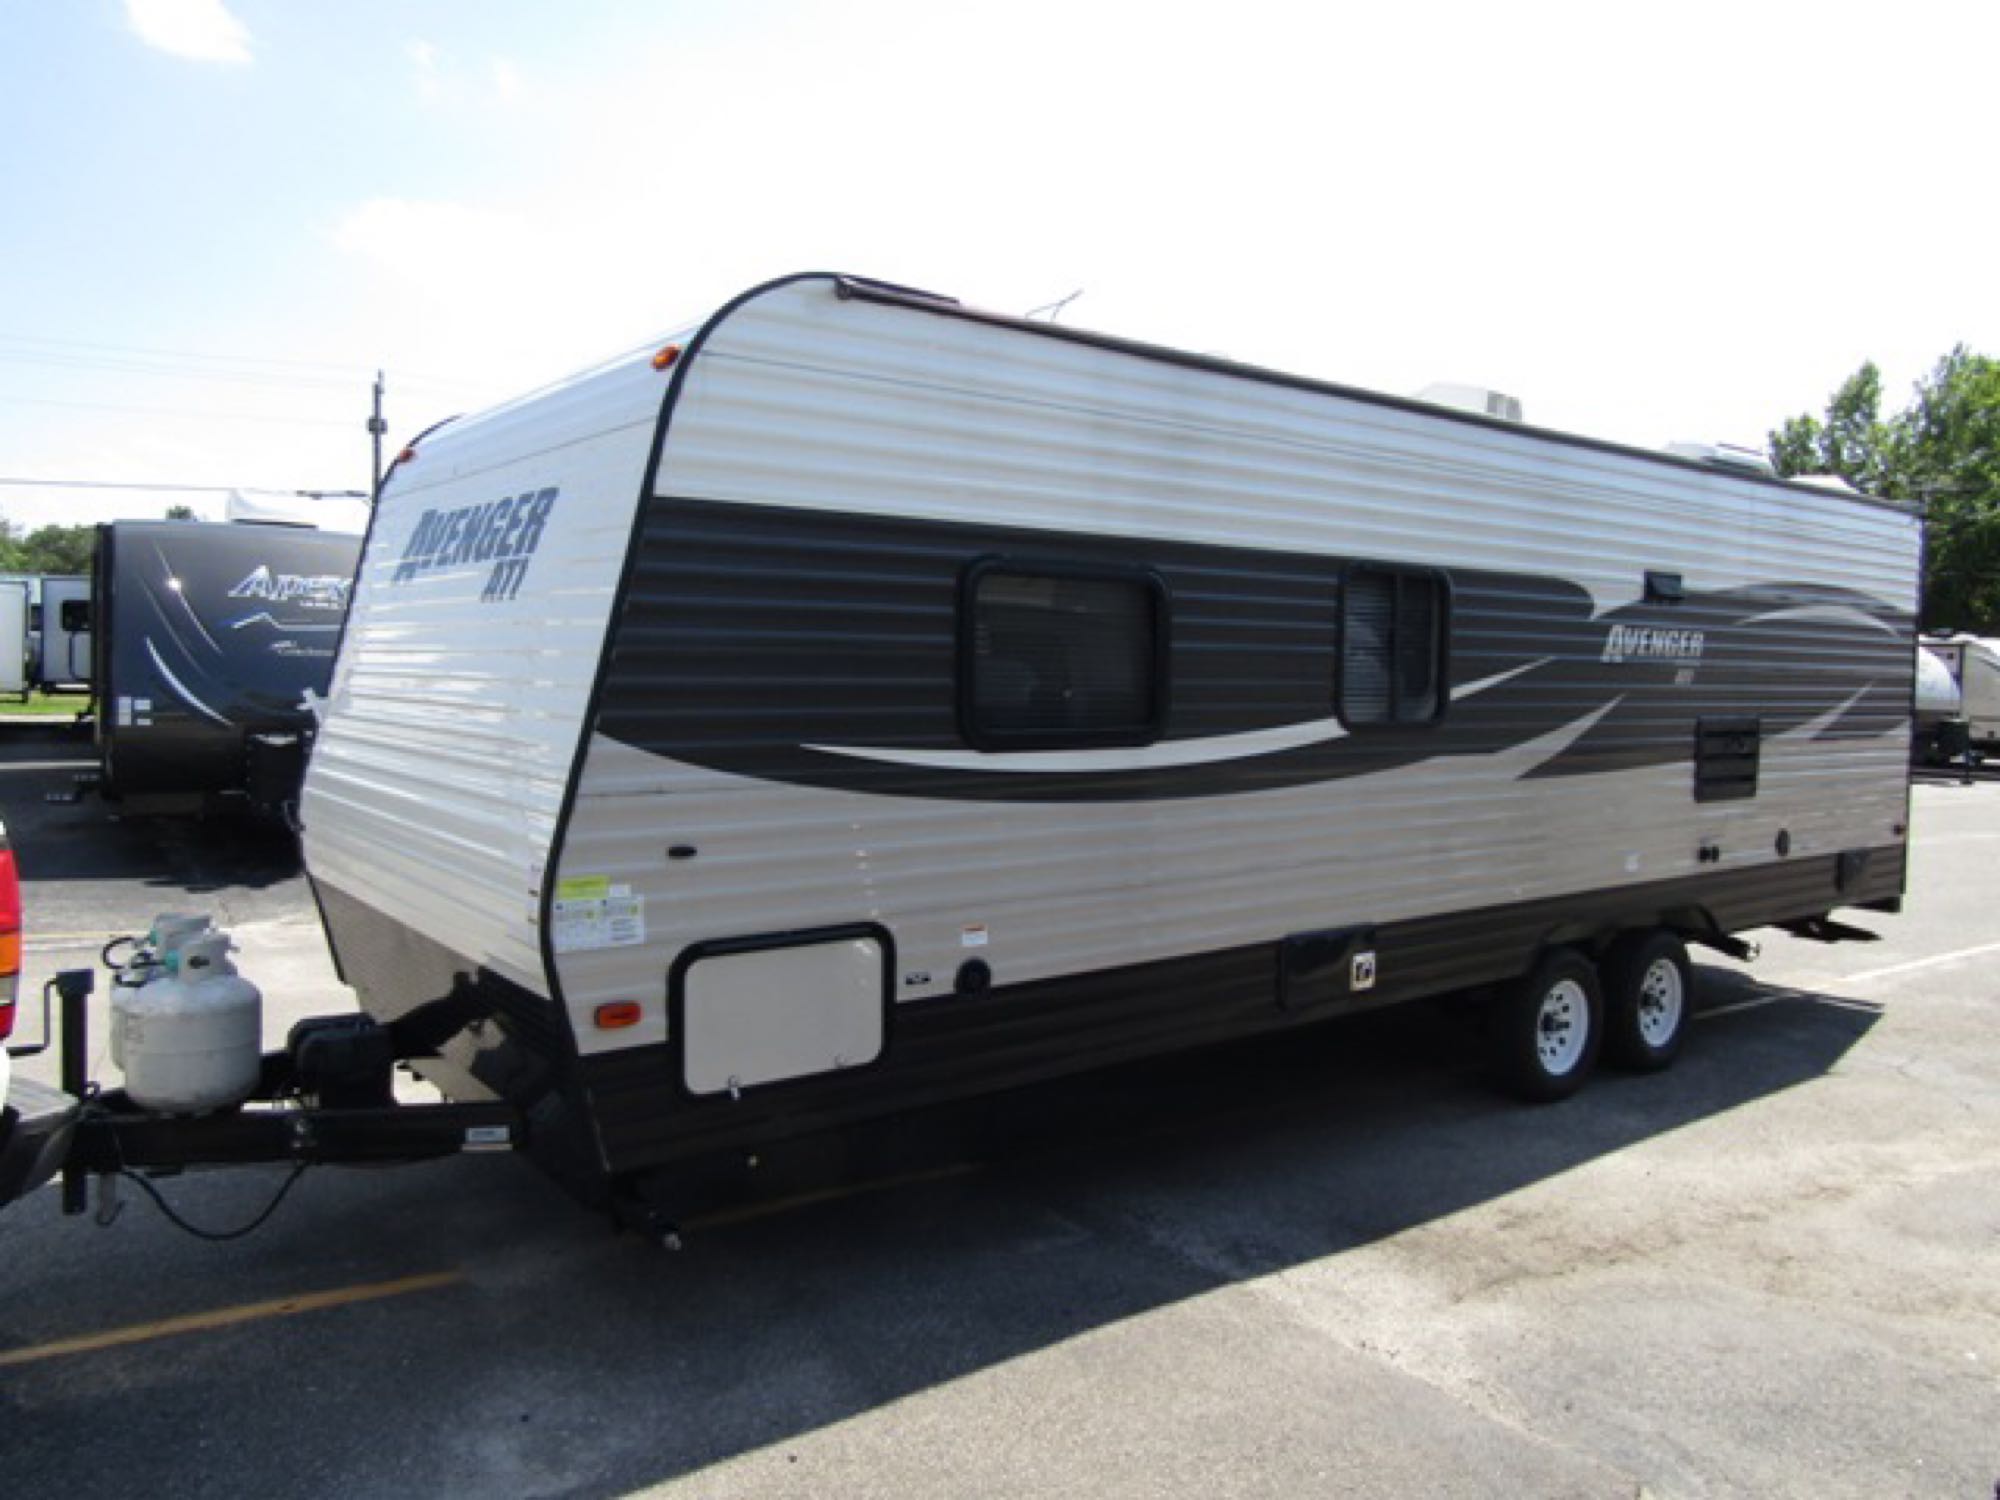 2016 Avenger prime time ati 26bb Trailer Rental in Cheyenne, WY | Outdoorsy